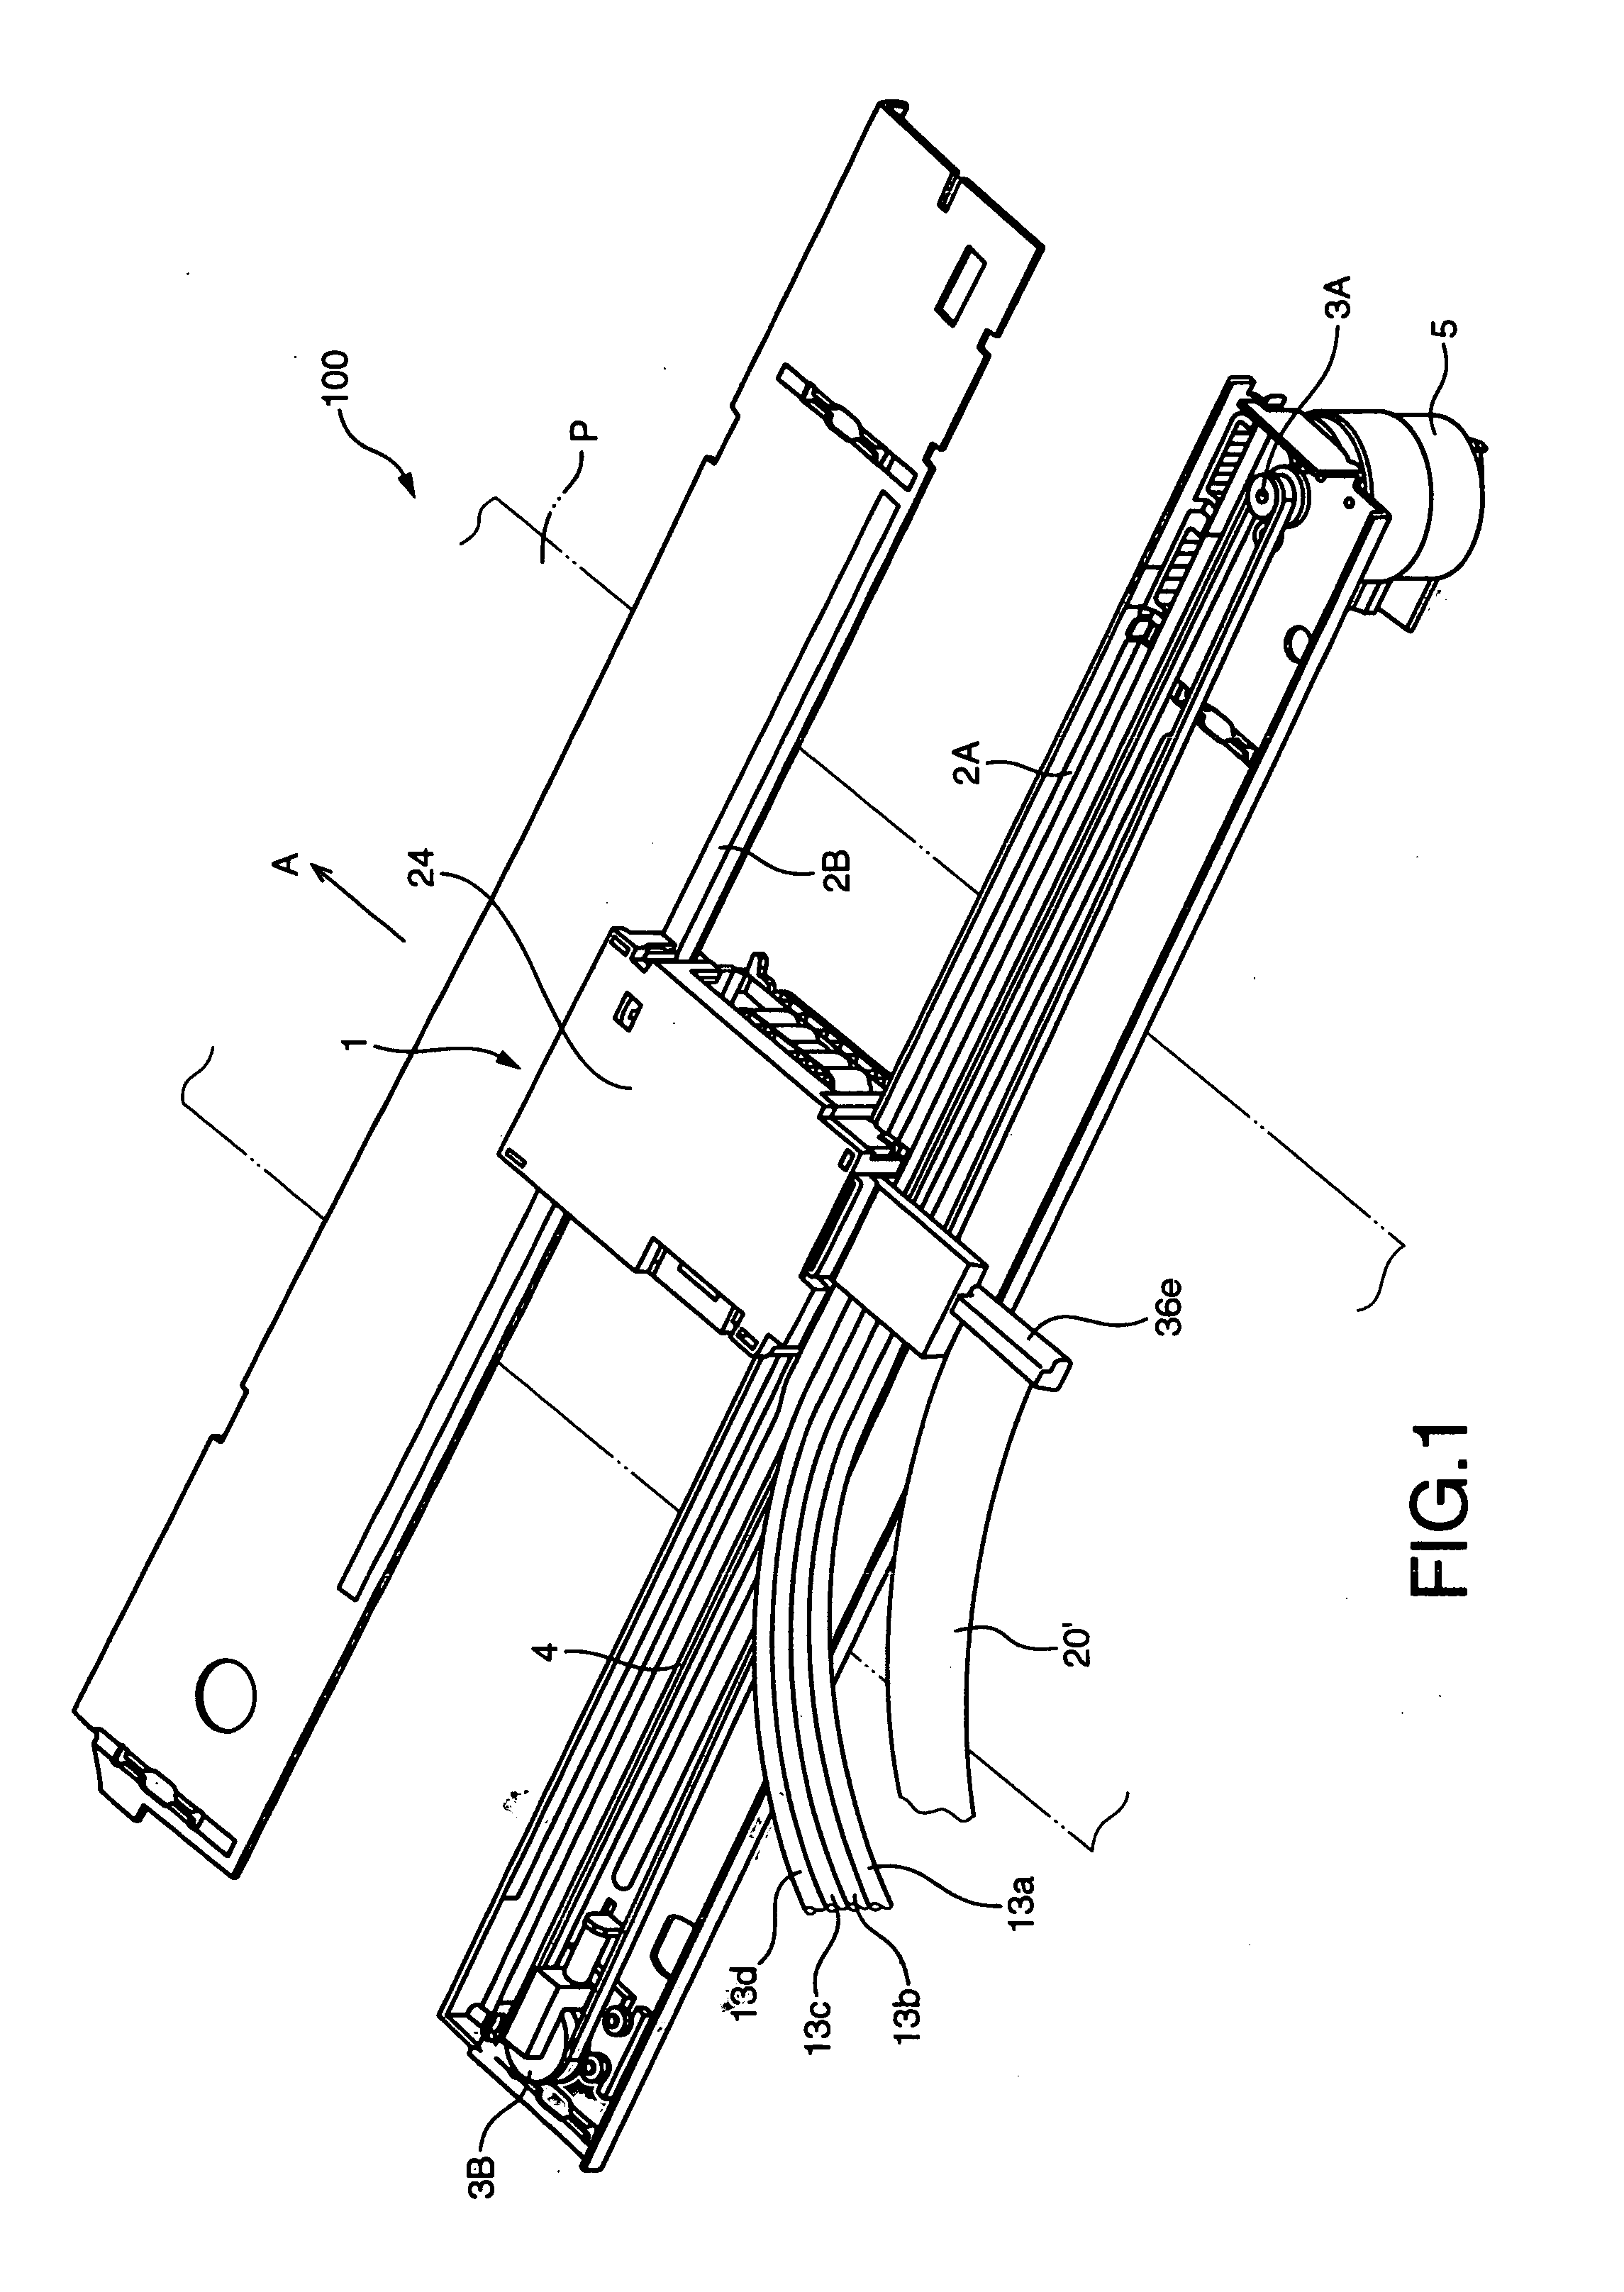 Inkjet head with conductive elastic member for electrical continuity between remote contacts in same